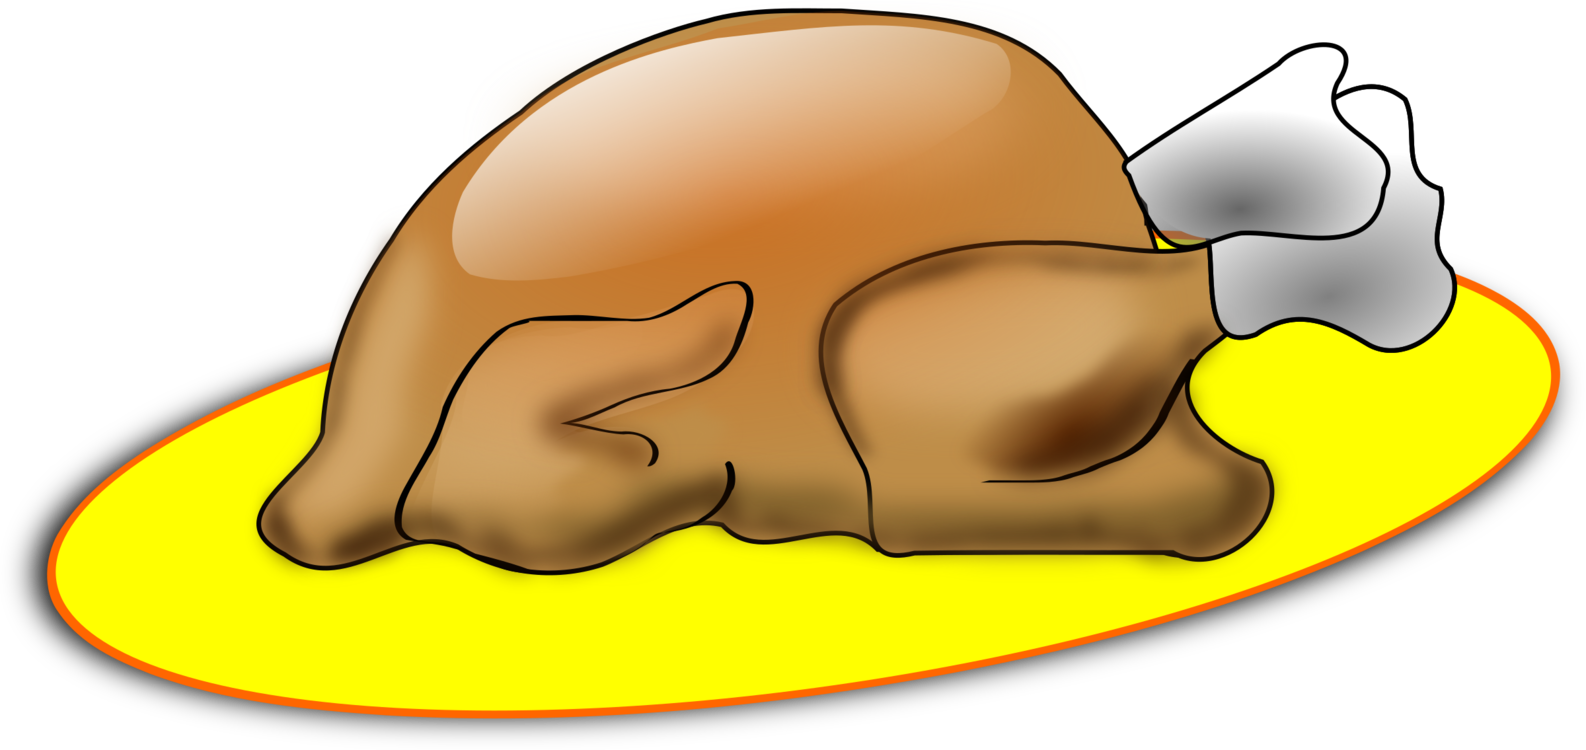 Turkey Meat Stuffing Drawing Roasting Clipart Large Size Png Image